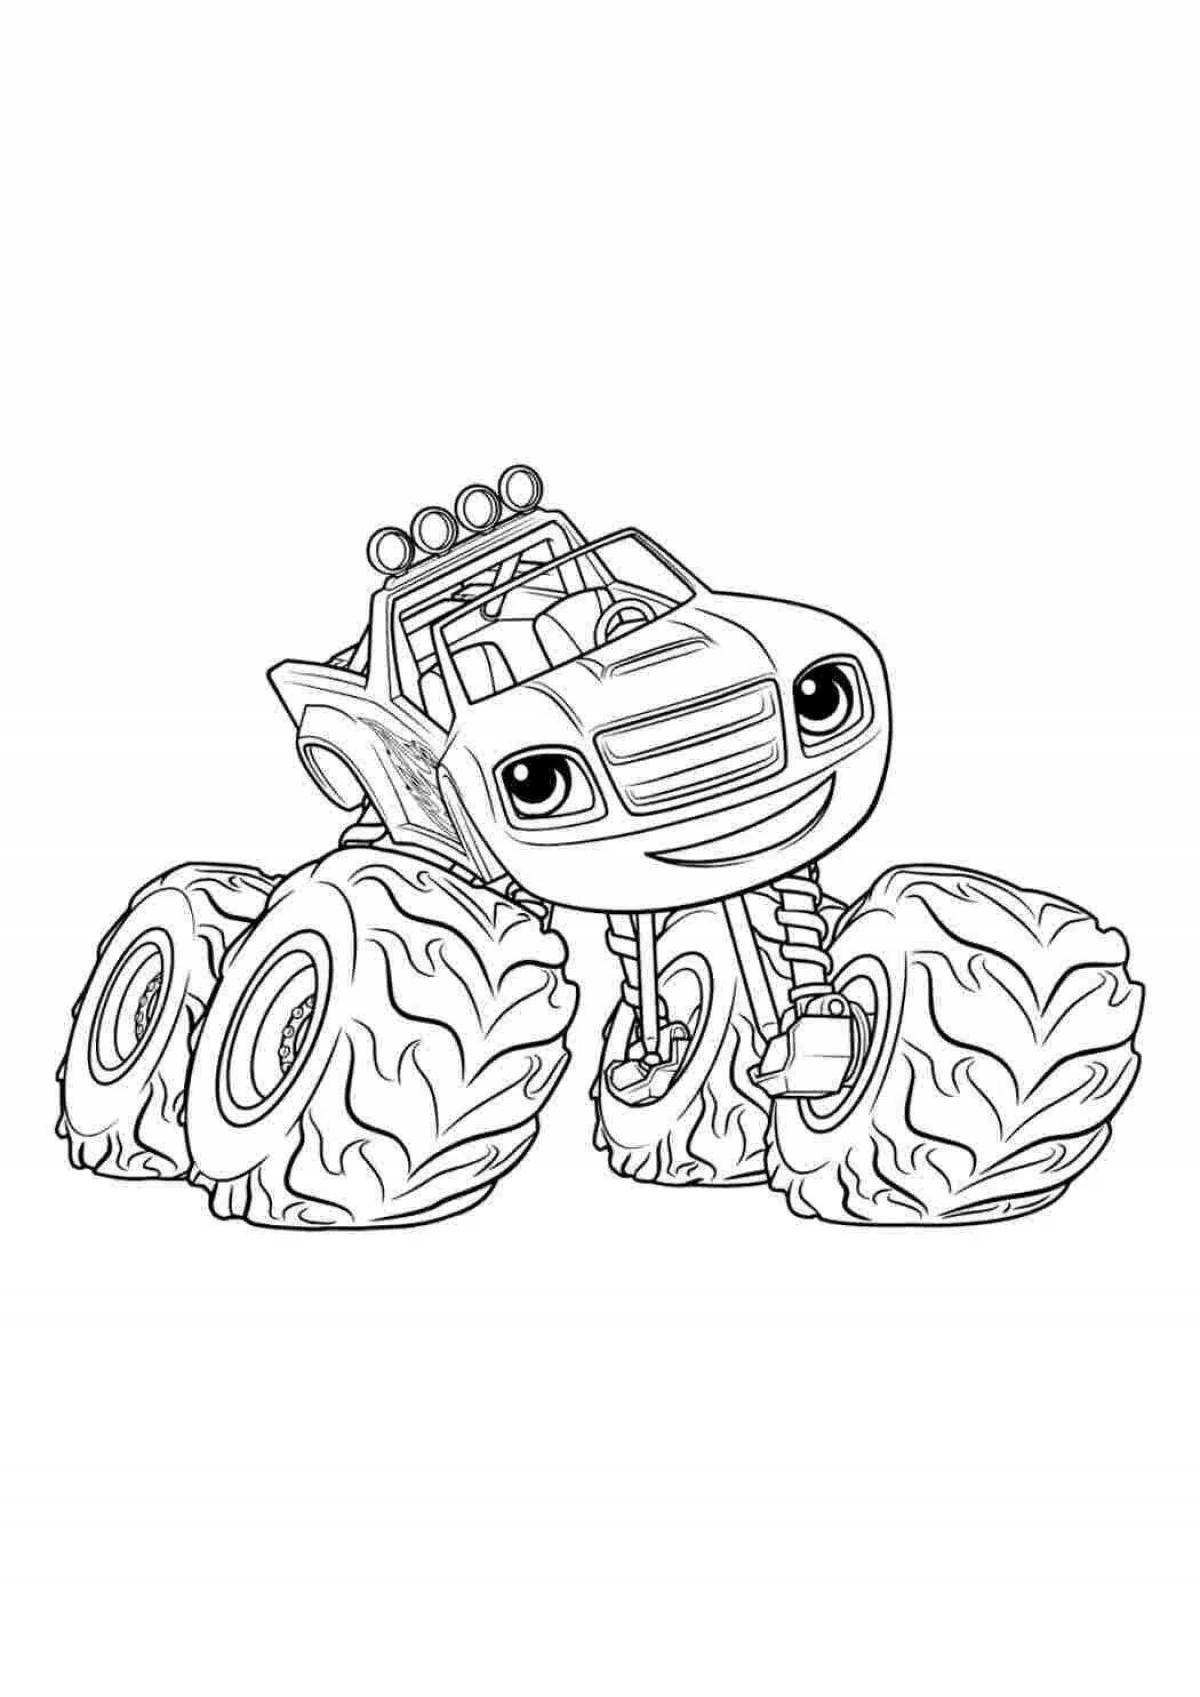 Adorable flash drives and wonder cars coloring pages for kids